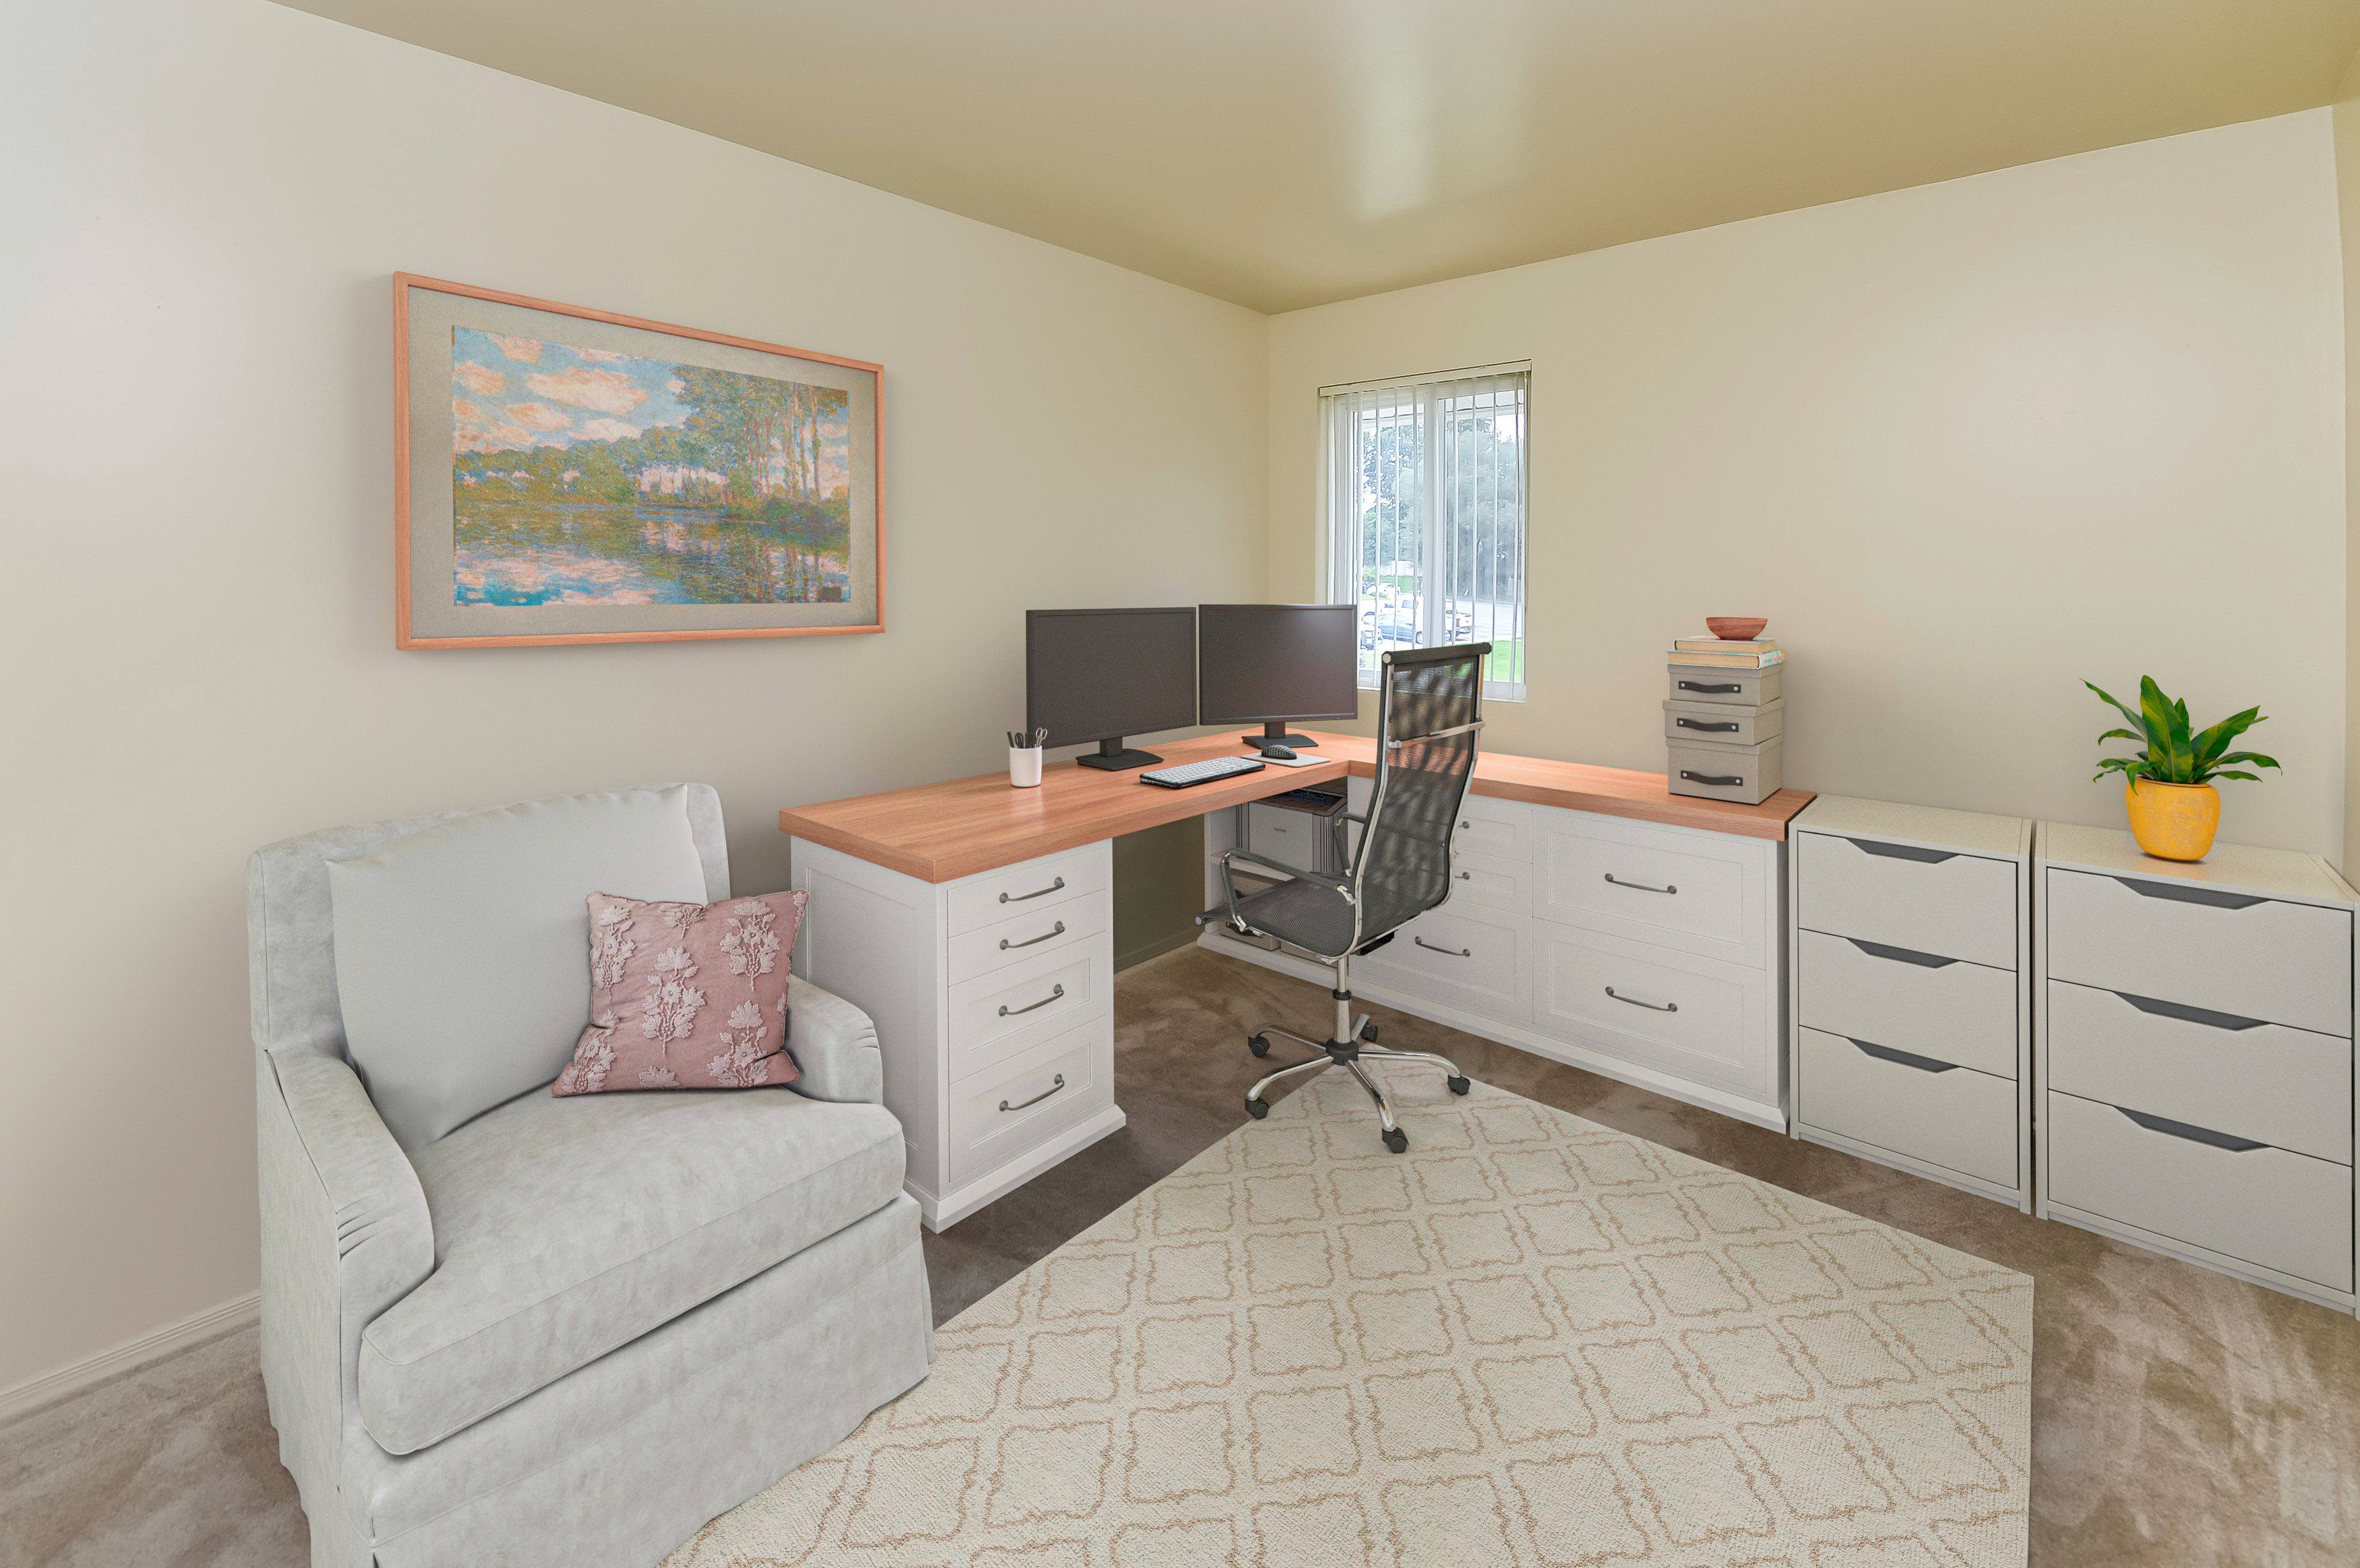 Home office at Greentree Village Townhomes in Lebanon, Pennsylvania